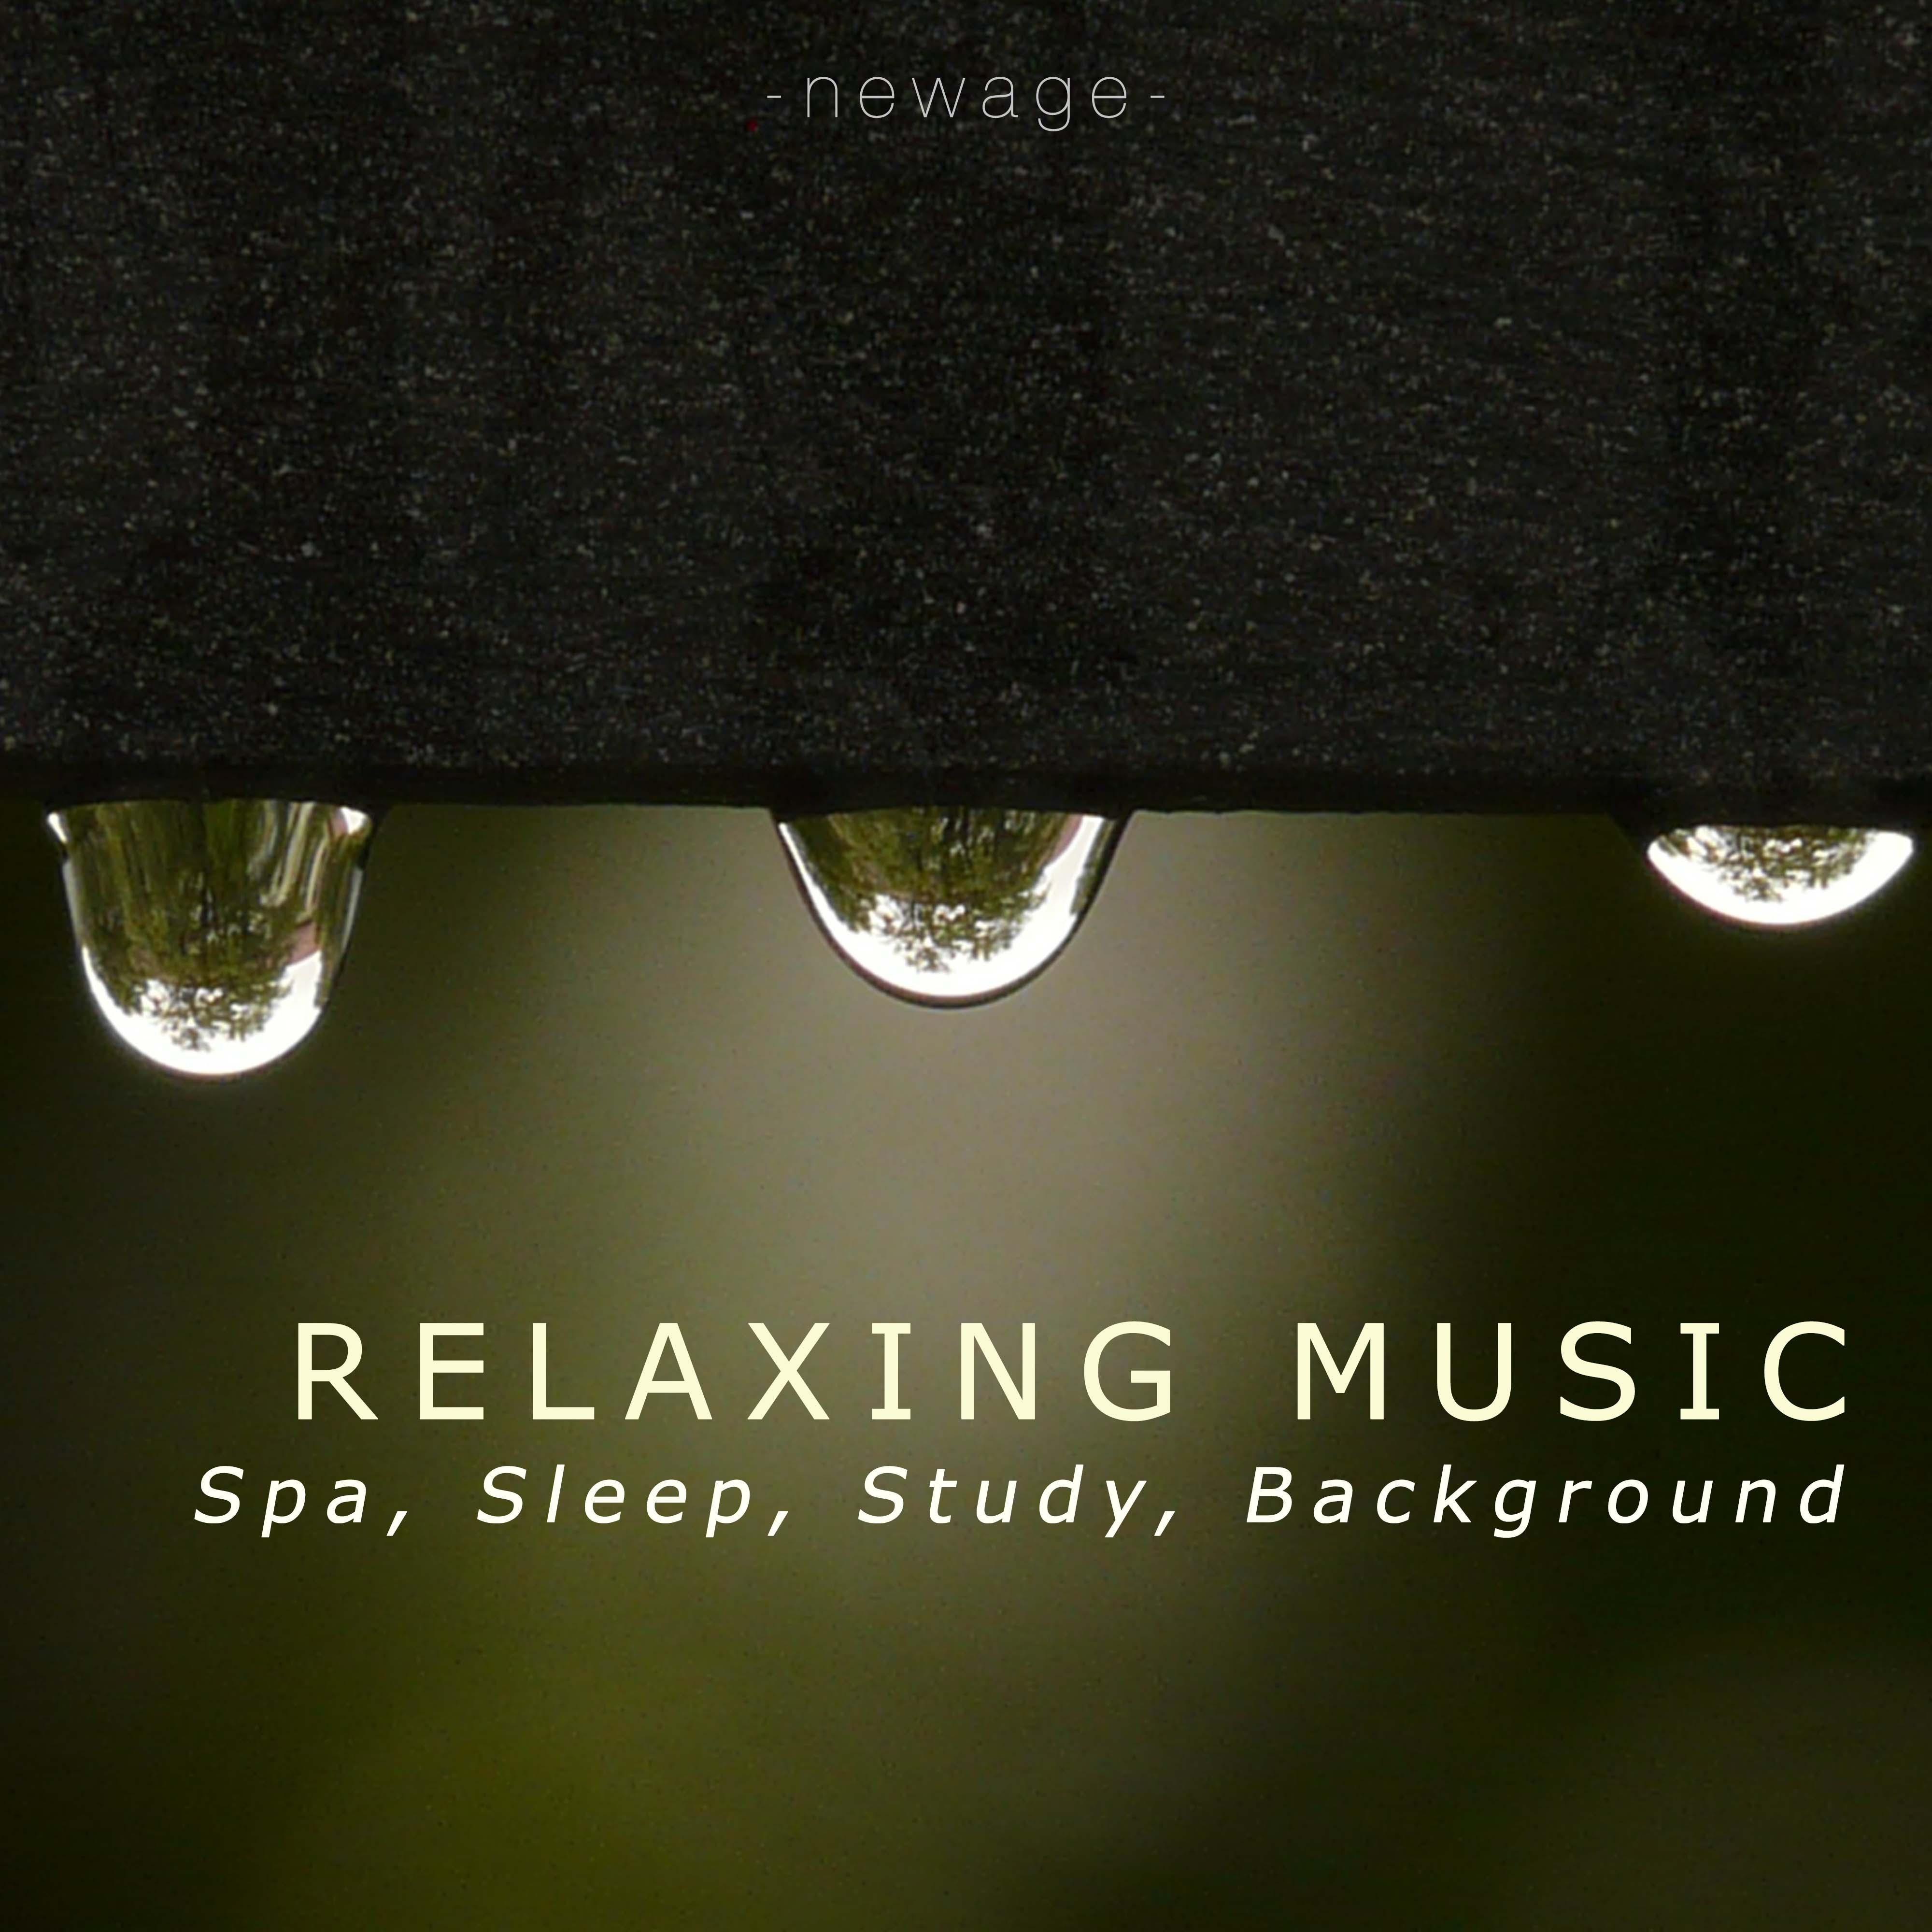 Relaxing Music - Relaxation Music, Spa, Sleep, Study, Background